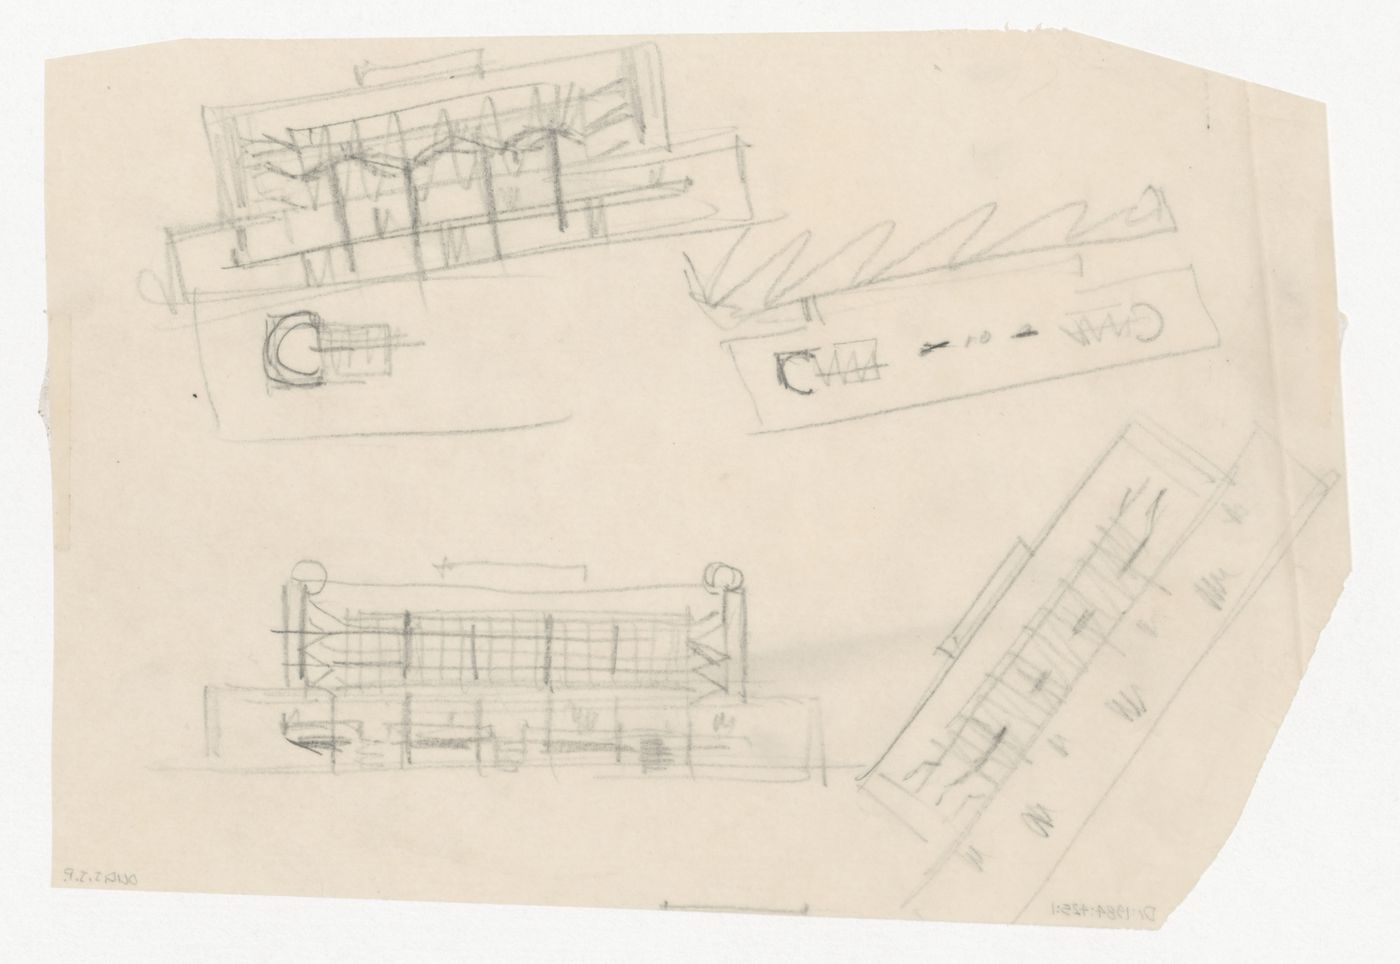 Sketch plans and sketch south elevations for the Congress Hall Complex, The Hague, Netherlands